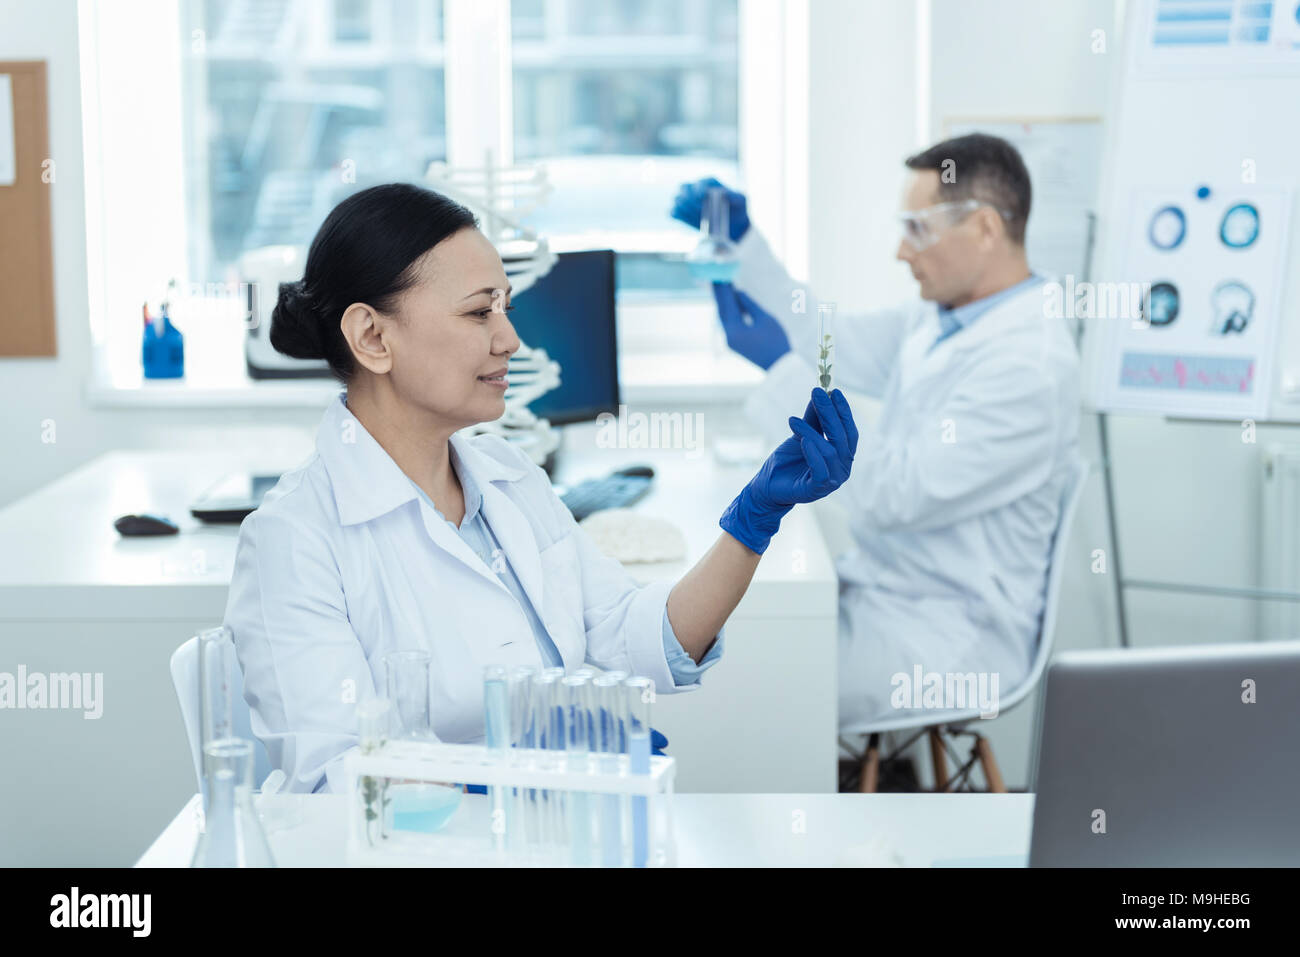 Content scientist making an important experiment Stock Photo